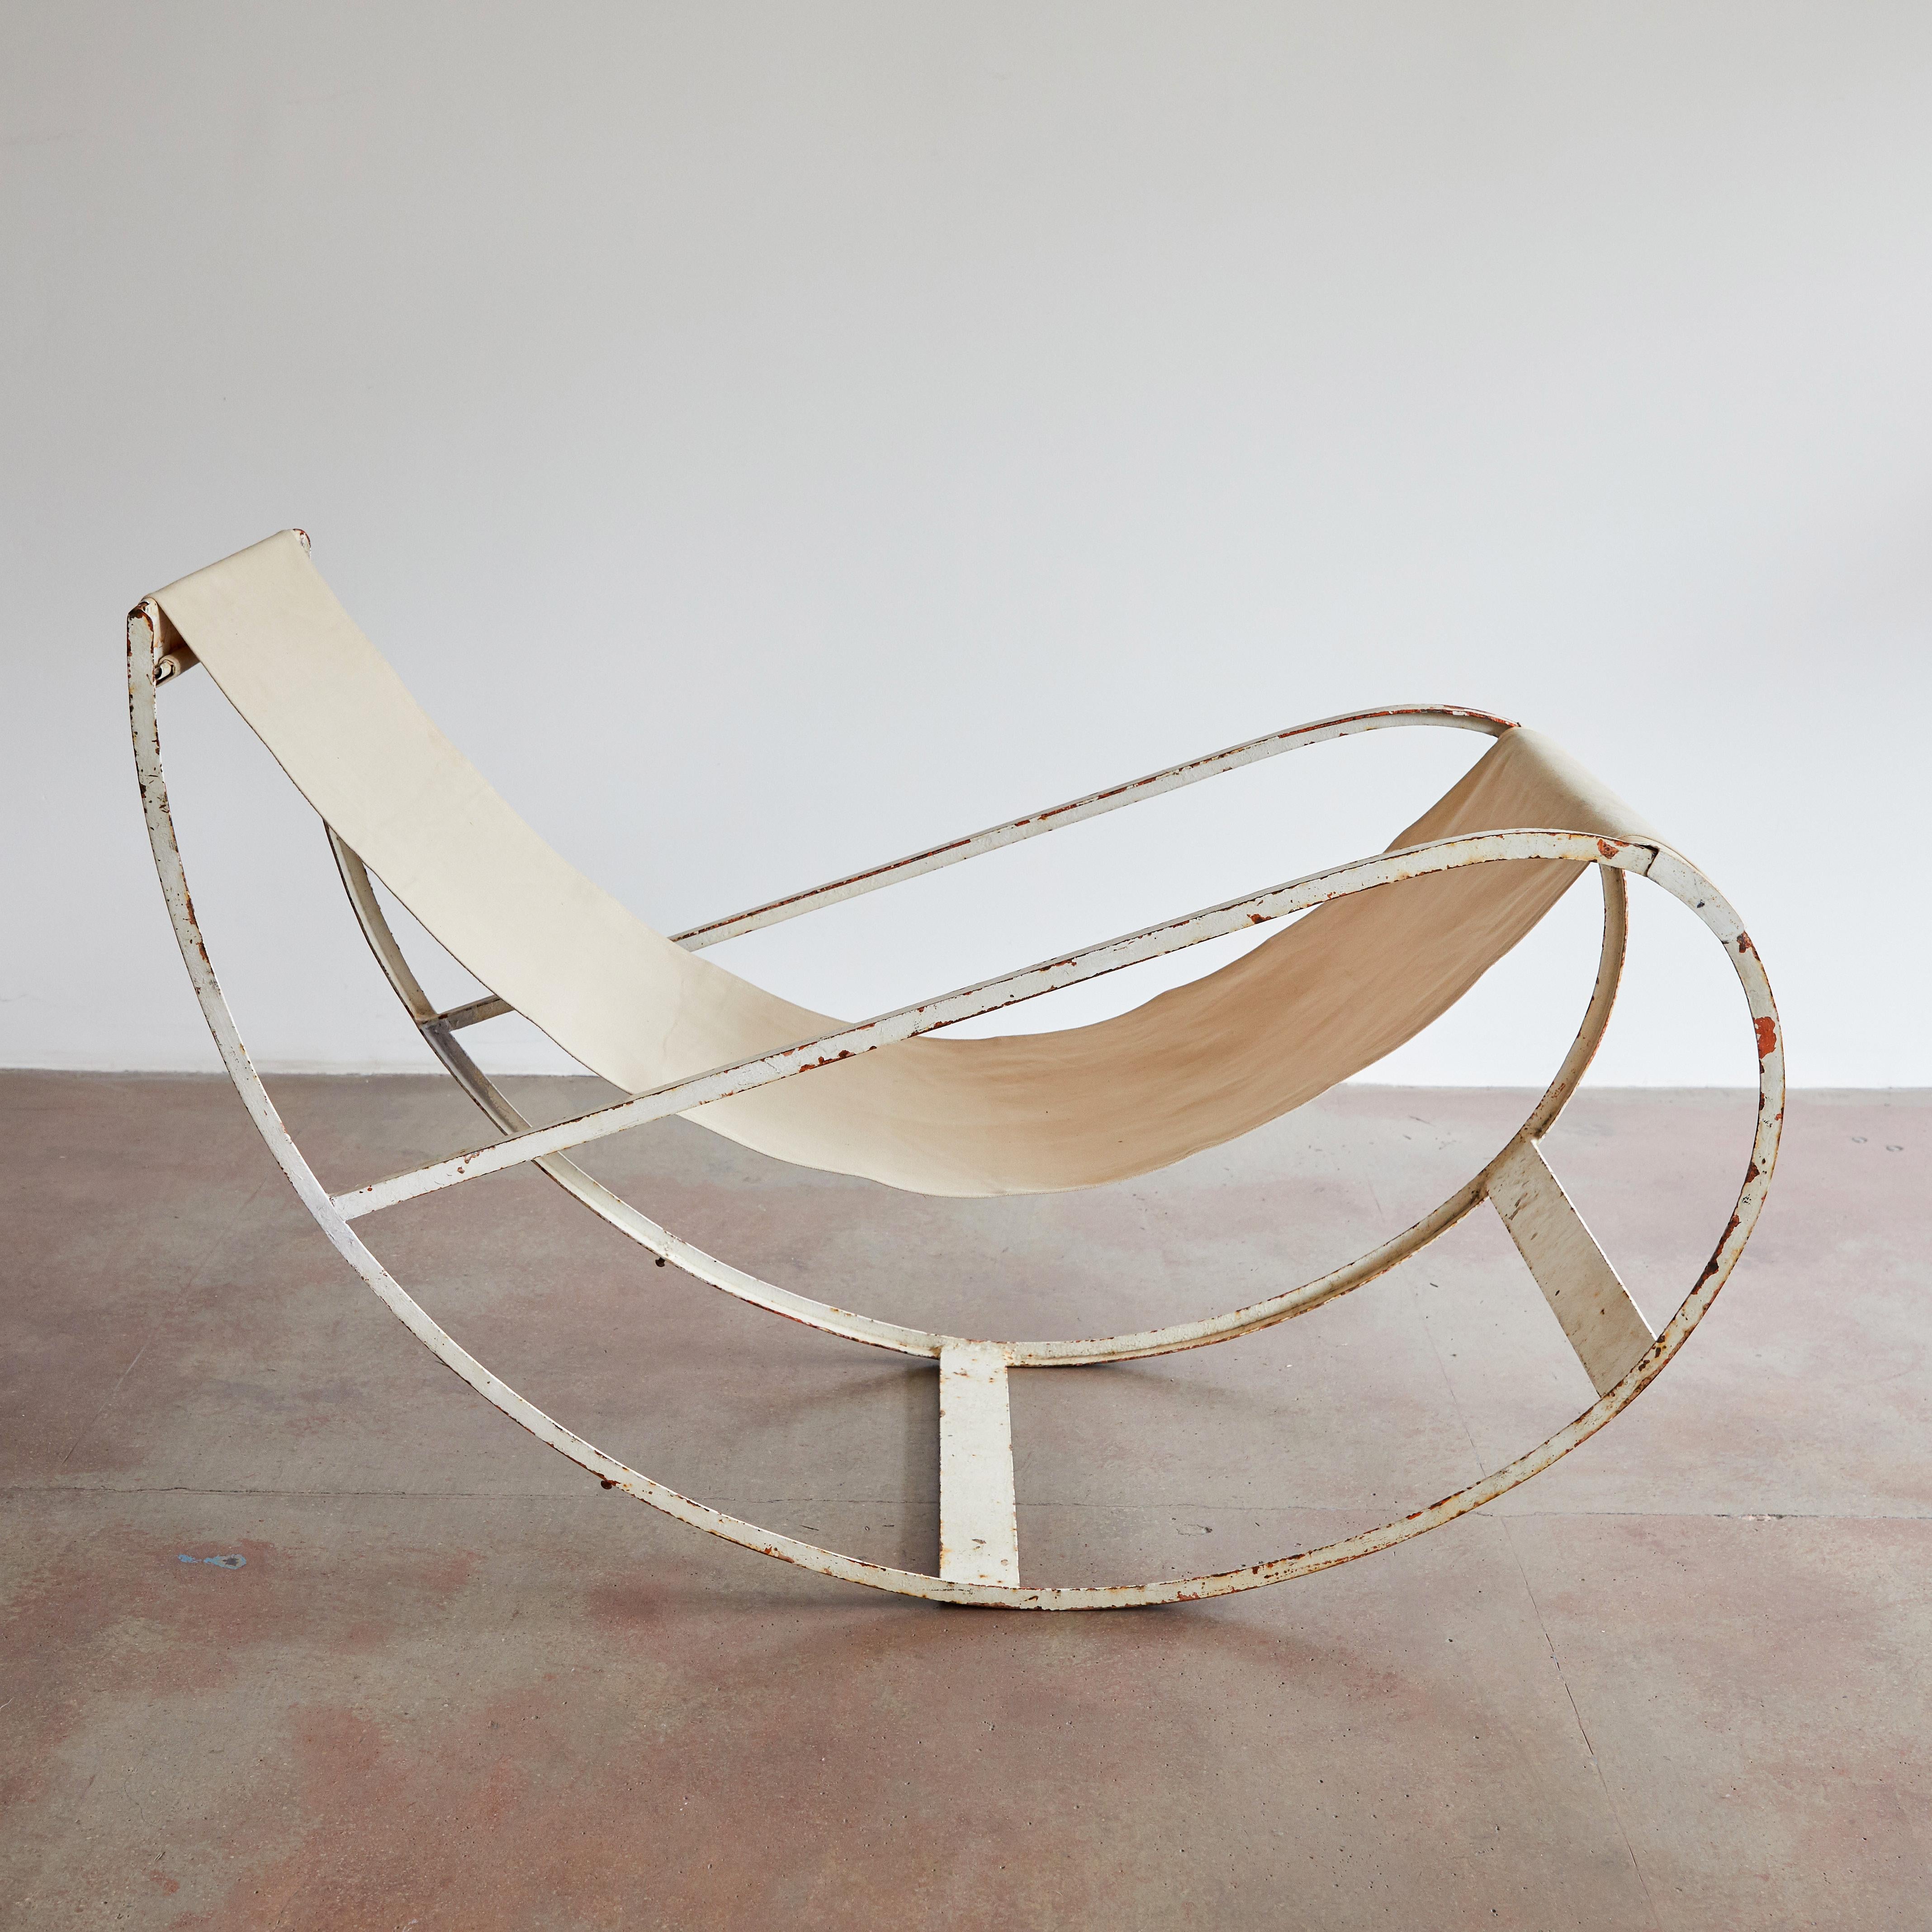 Rare painted metal rocking chair with canvas sling by François Turpin. Made in France circa 1930s.

Bibliography: Pierre Migennes, 